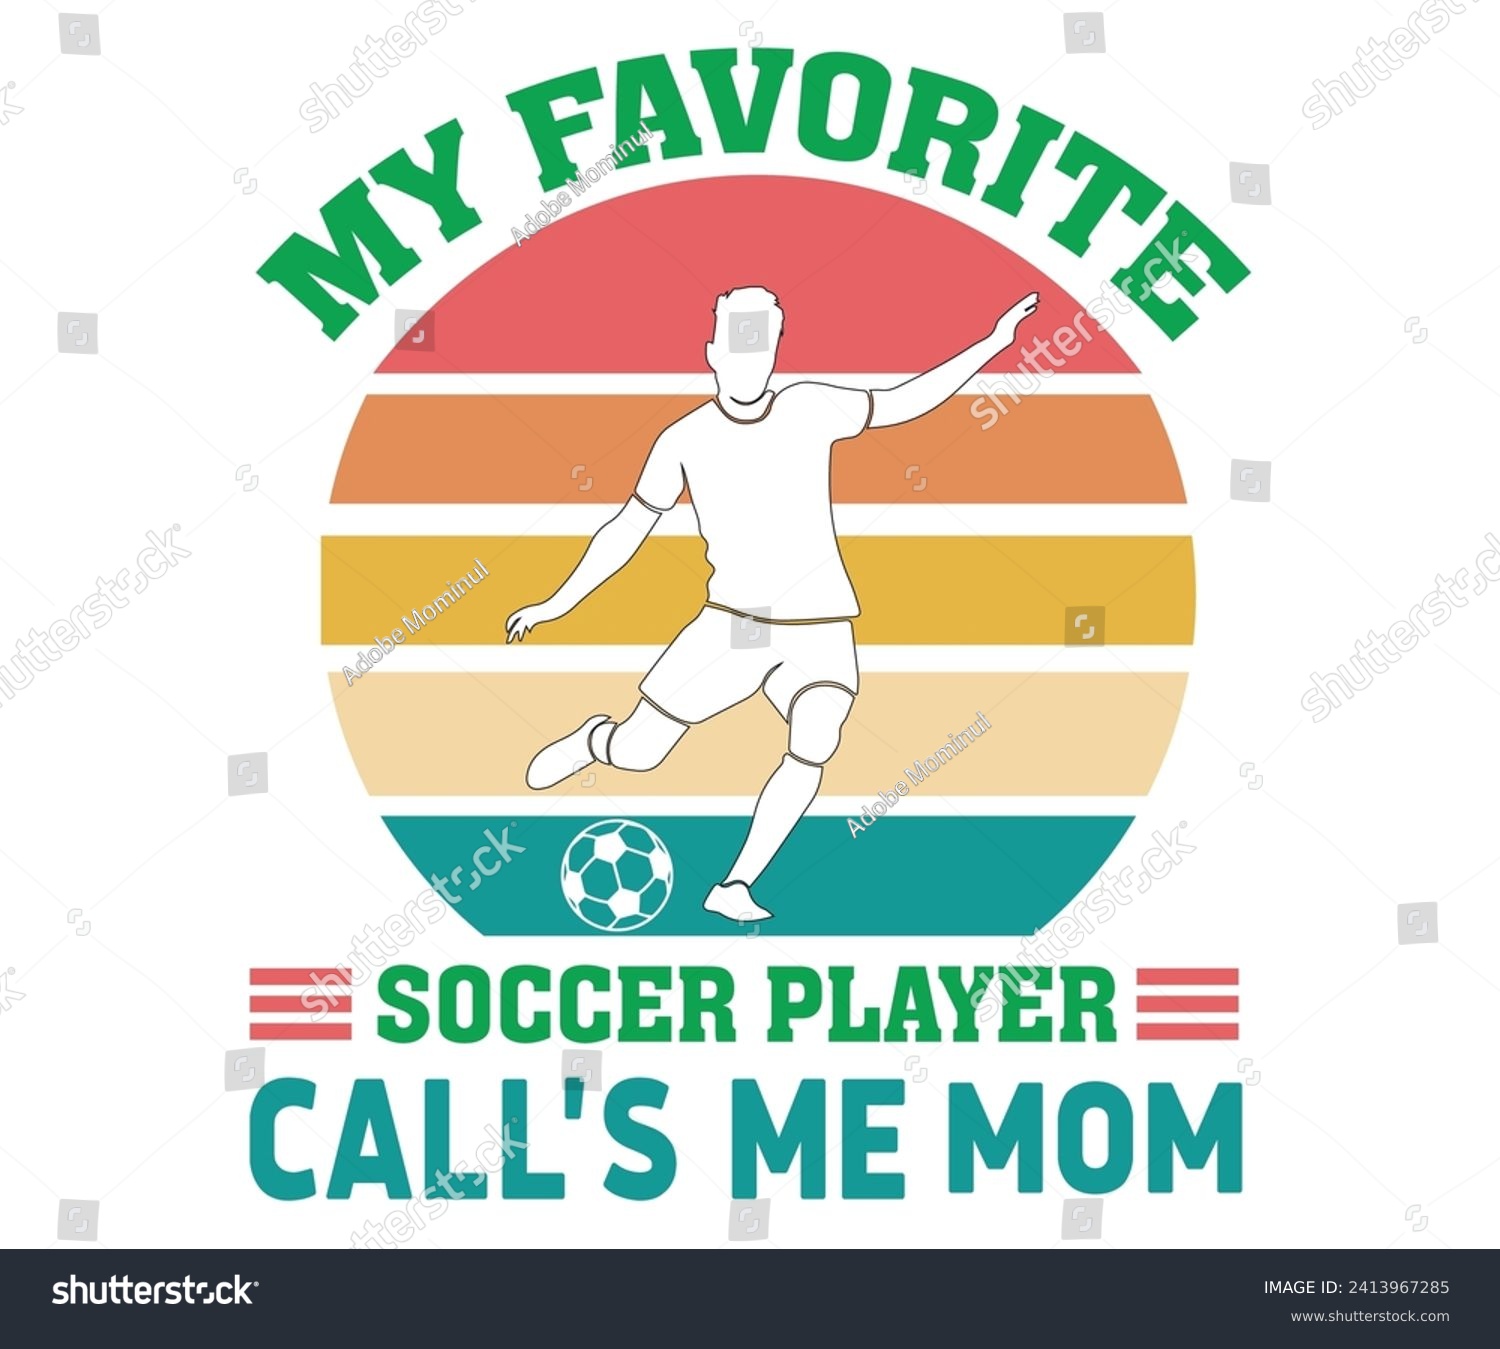 SVG of My Favorite Soccer Player Call's Me Mom,Soccer Svg,Soccer Quote Svg,Retro,Soccer Mom Shirt,Funny Shirt,Soccar Player Shirt,Game Day Shirt,Gift For Soccer,Dad of Soccer,Soccer Mascot,Soccer Football, svg